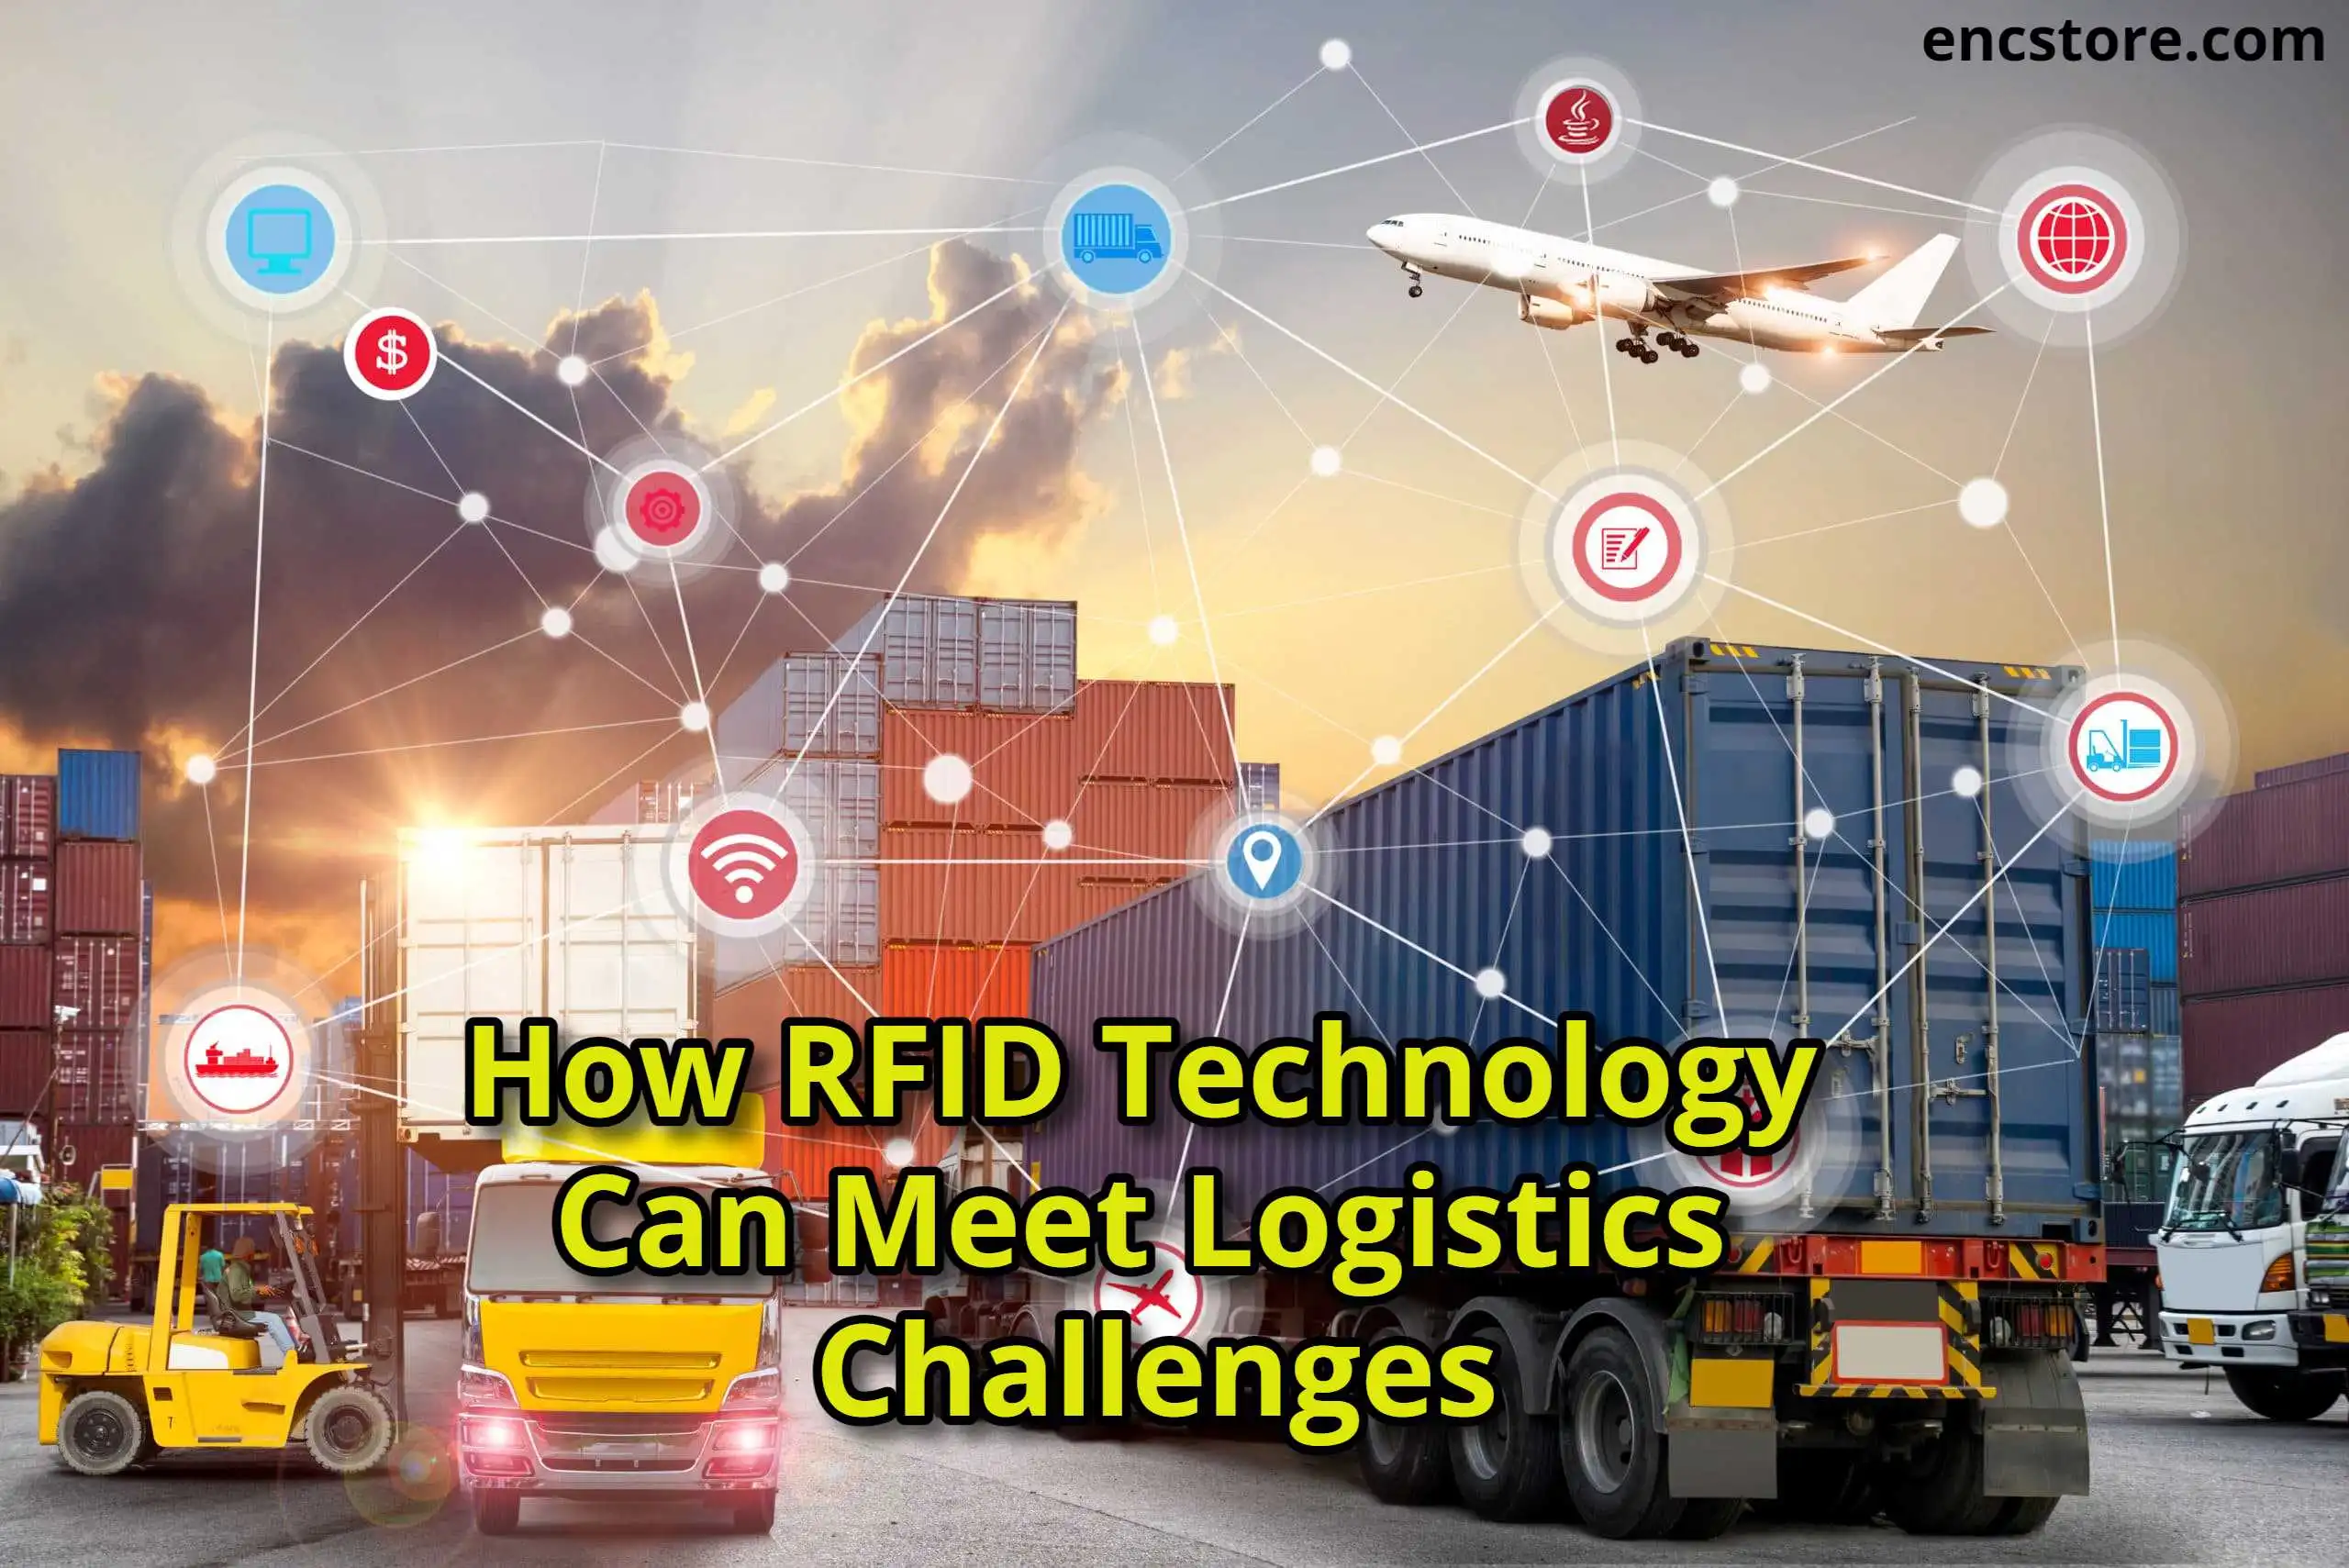 How RFID Technology Can Meet Logistics Challenges